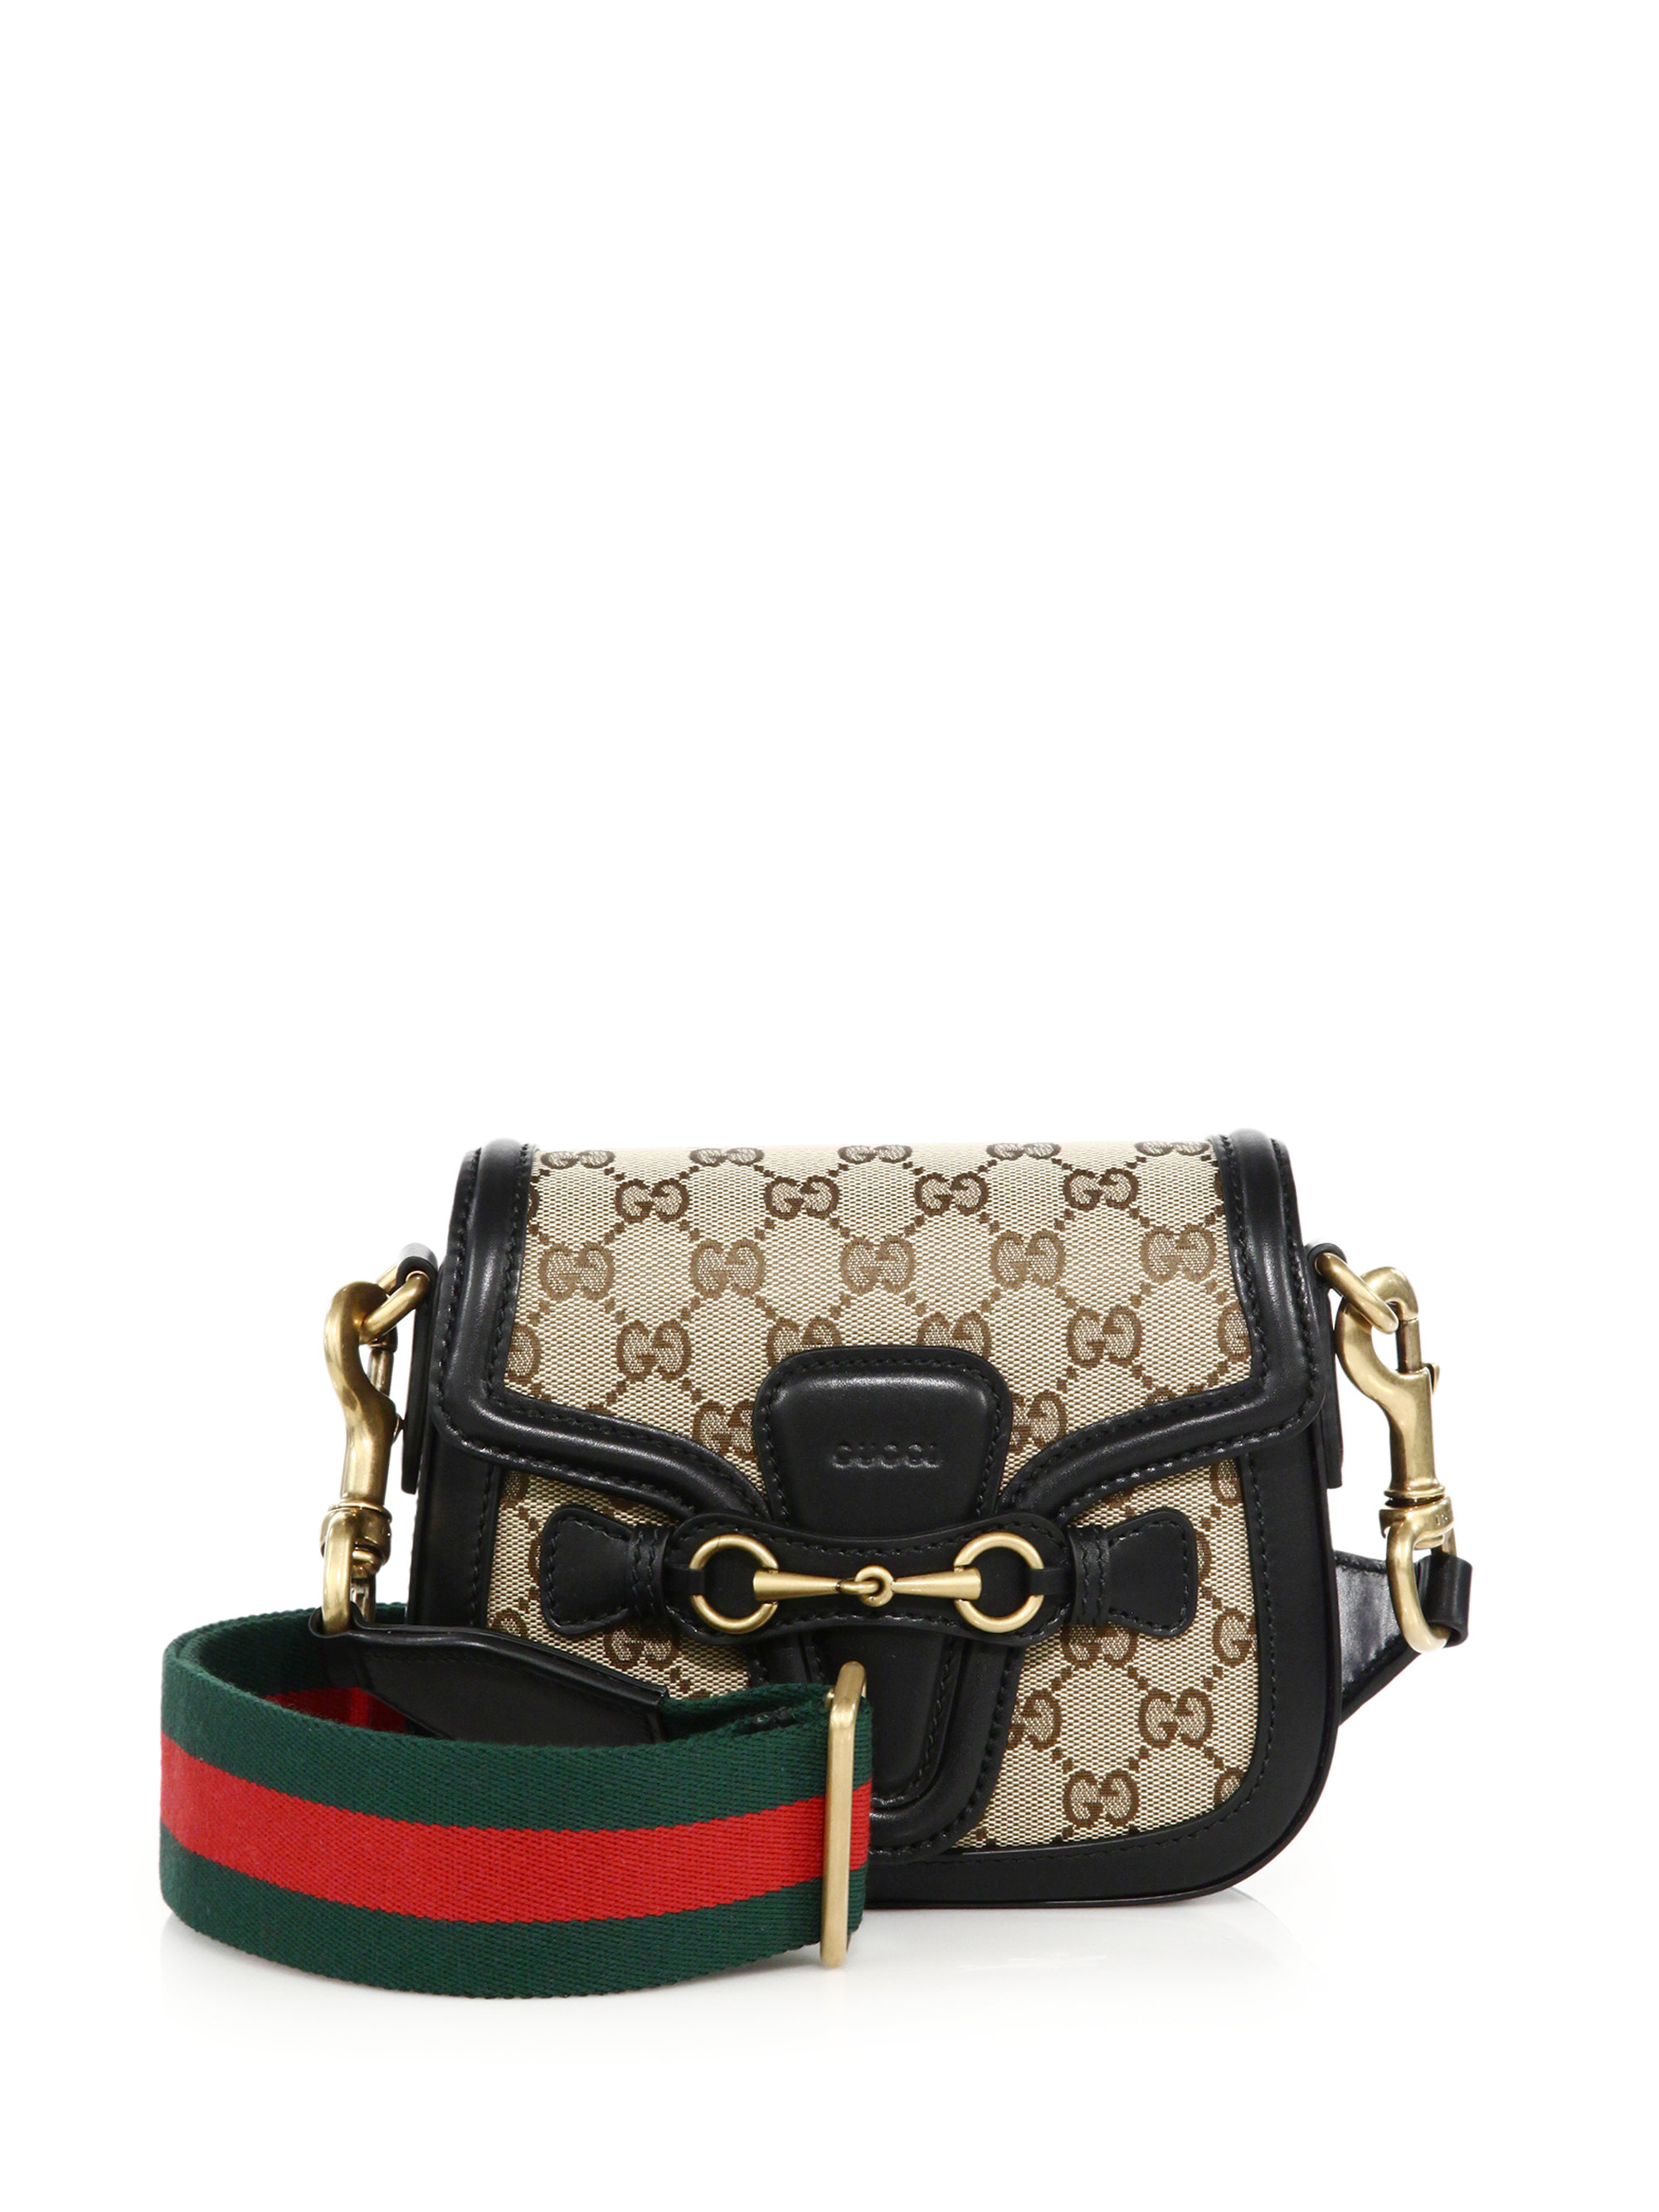 Gucci Lady Web Small GG Supreme Canvas Shoulder Bag in Natural - Lyst